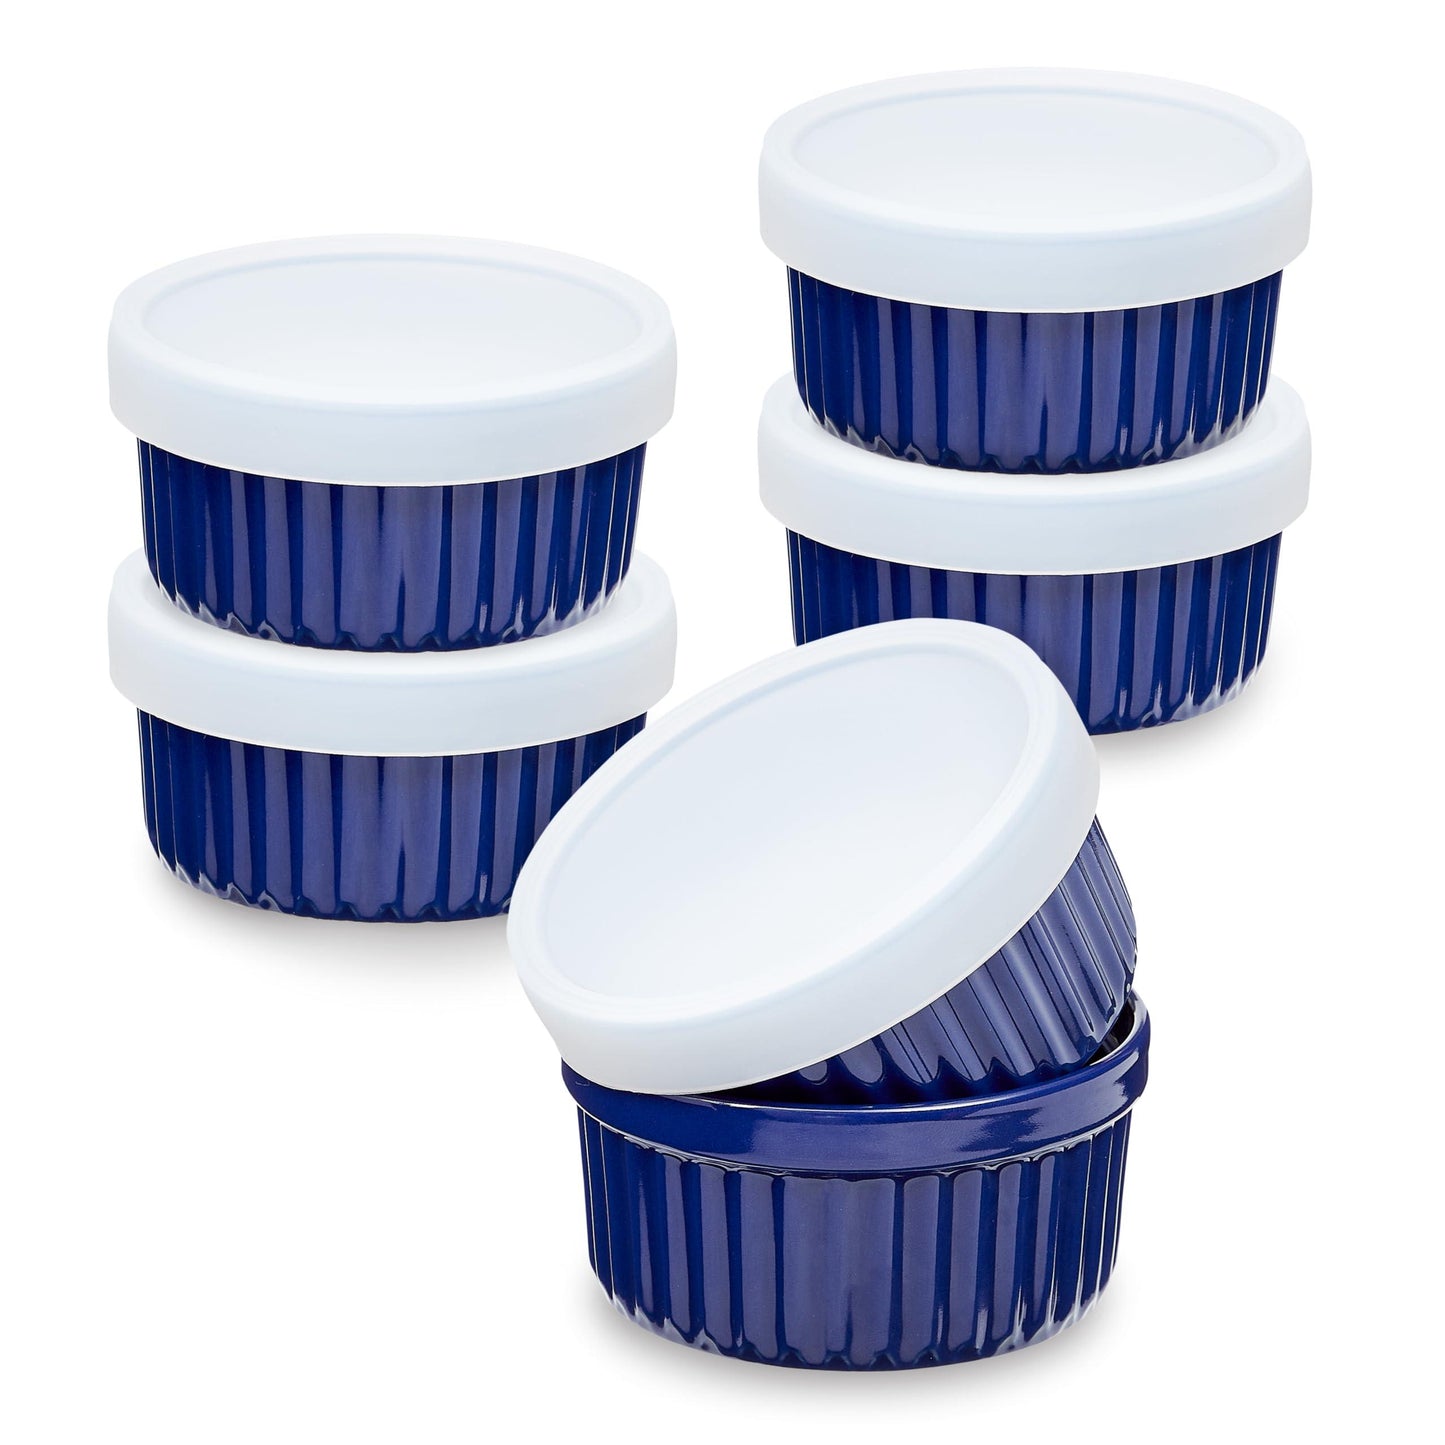 Sheffield Home Ramekin Set - Elevate Culinary Creations with 6 Round Ceramic Bowls (8oz), Oven-Safe Cups for Pudding, Creme Brulee, Souffle. Includes Silicone Lids, Dishwasher & Microwave Safe - Blue - CookCave